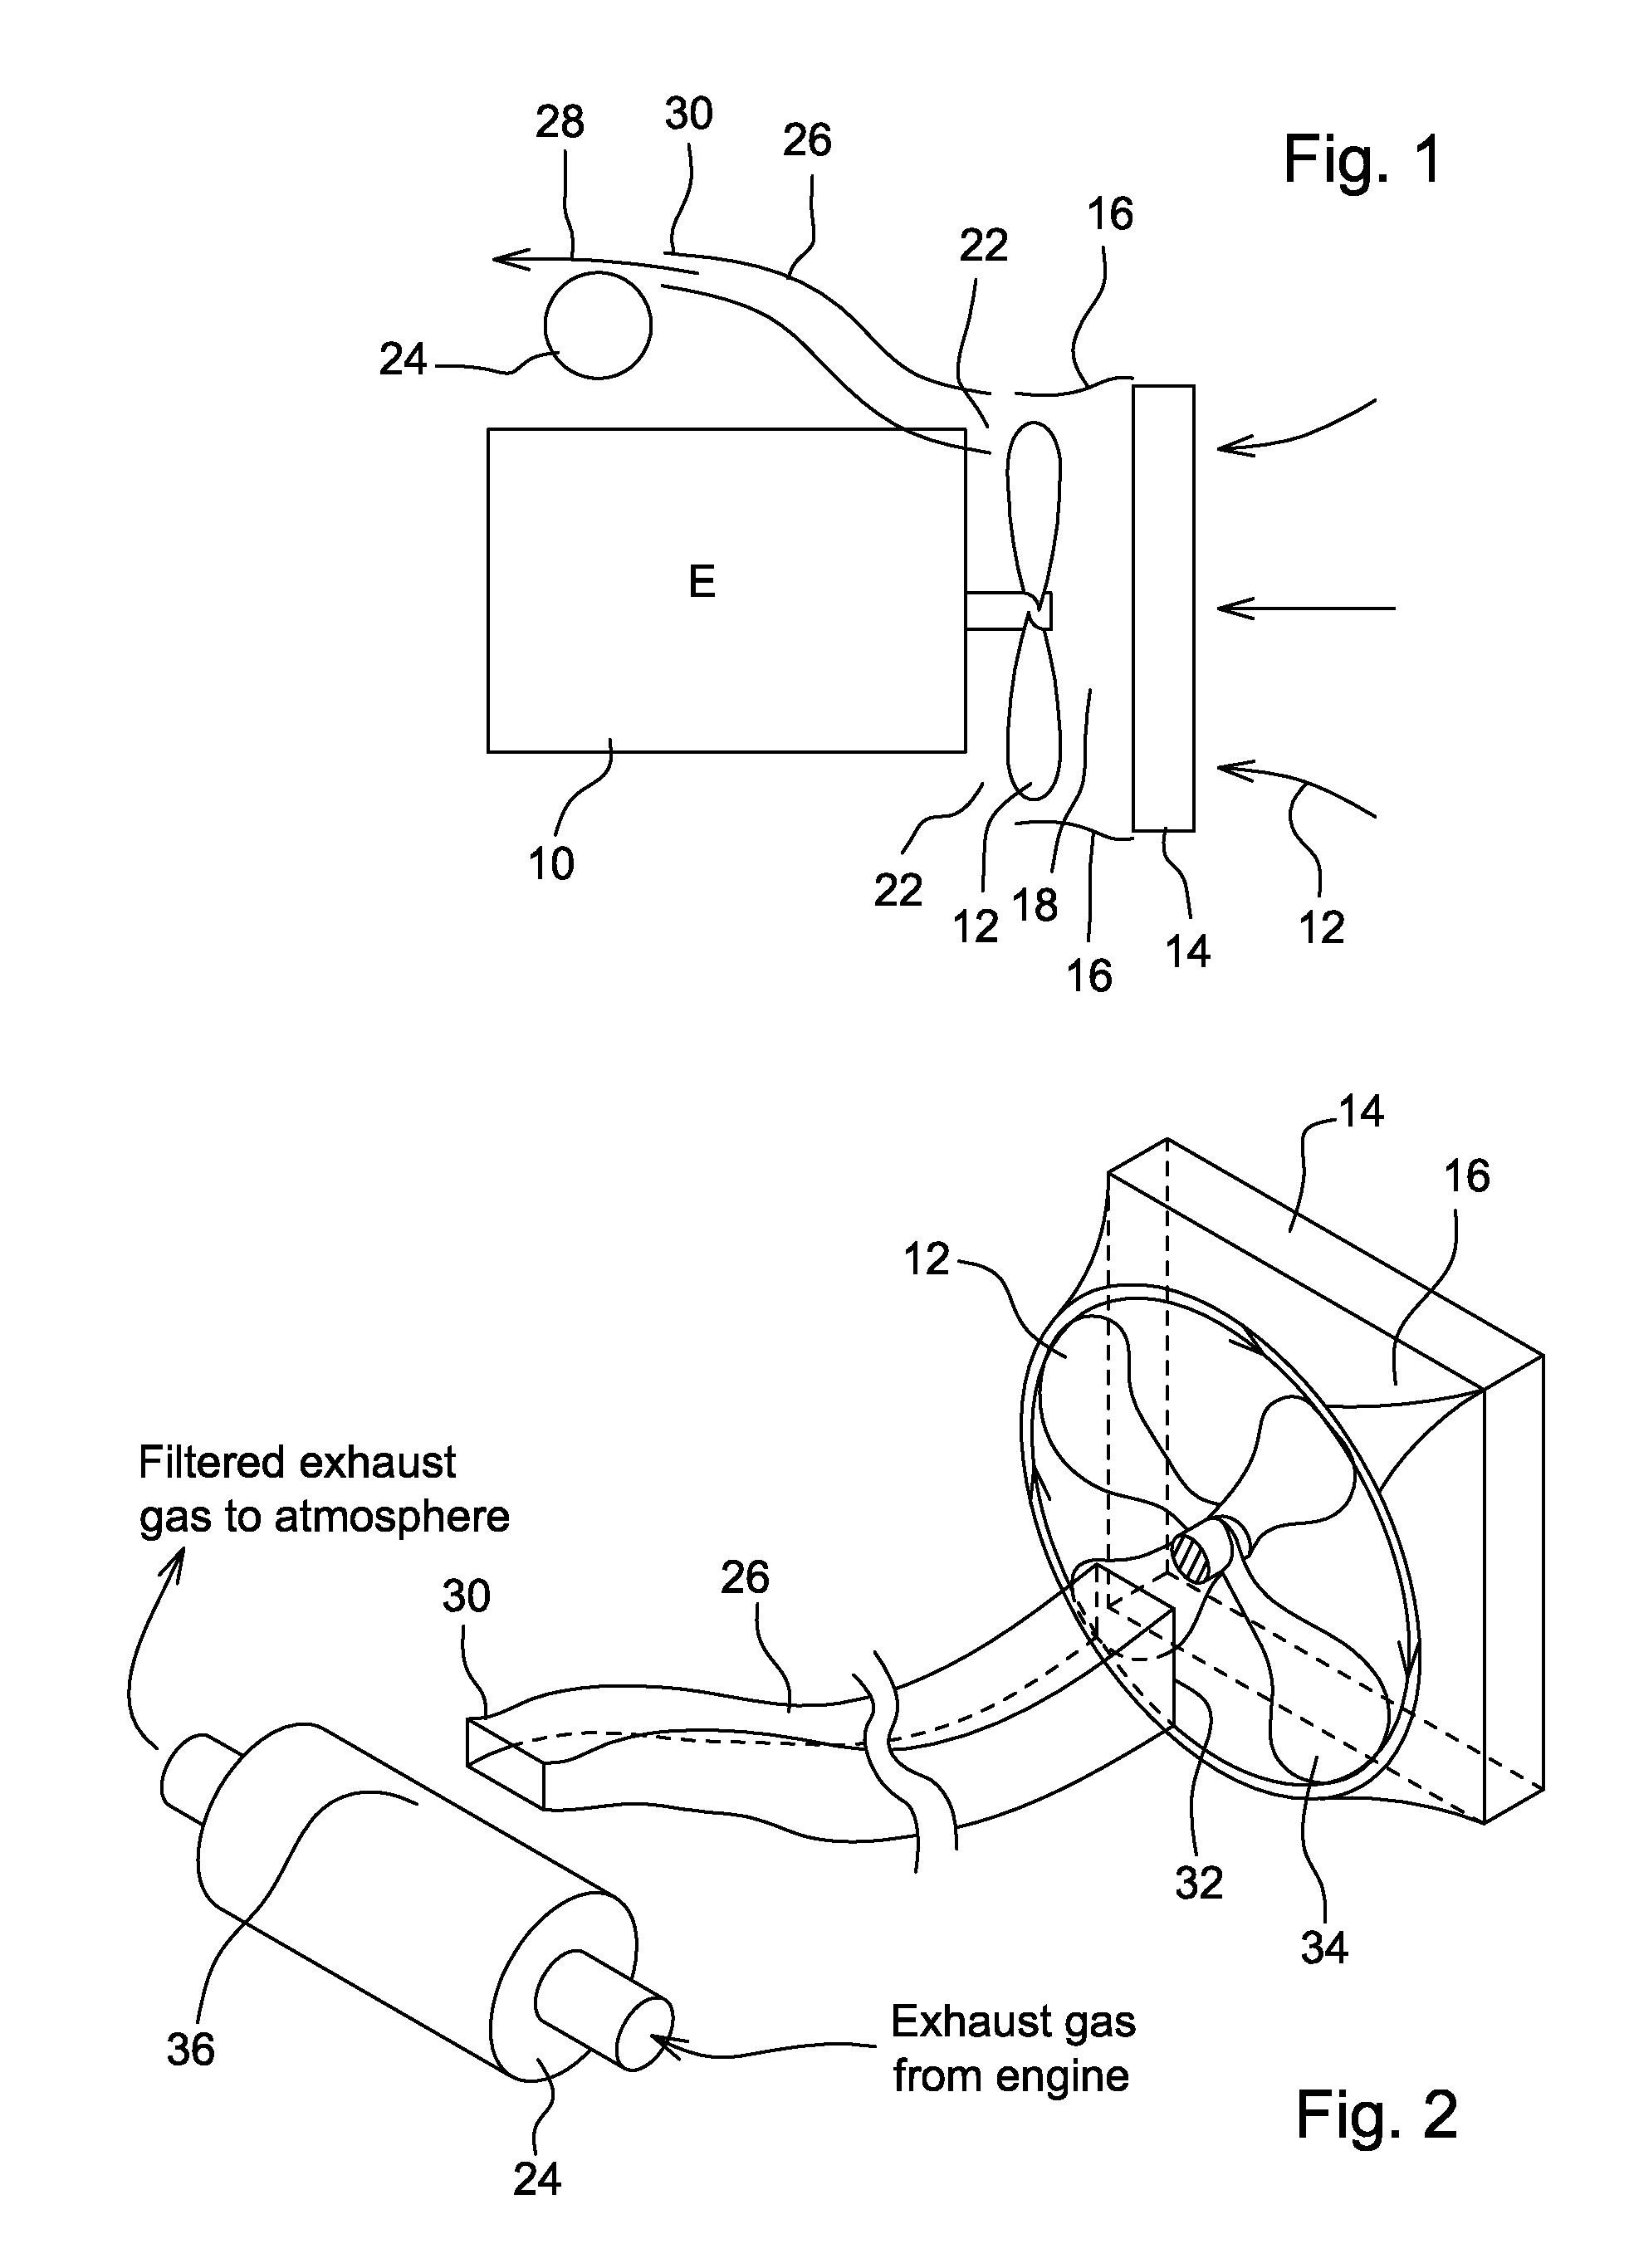 Engine Compartment Arrangement For Cleaning Diesel Particulate Filter